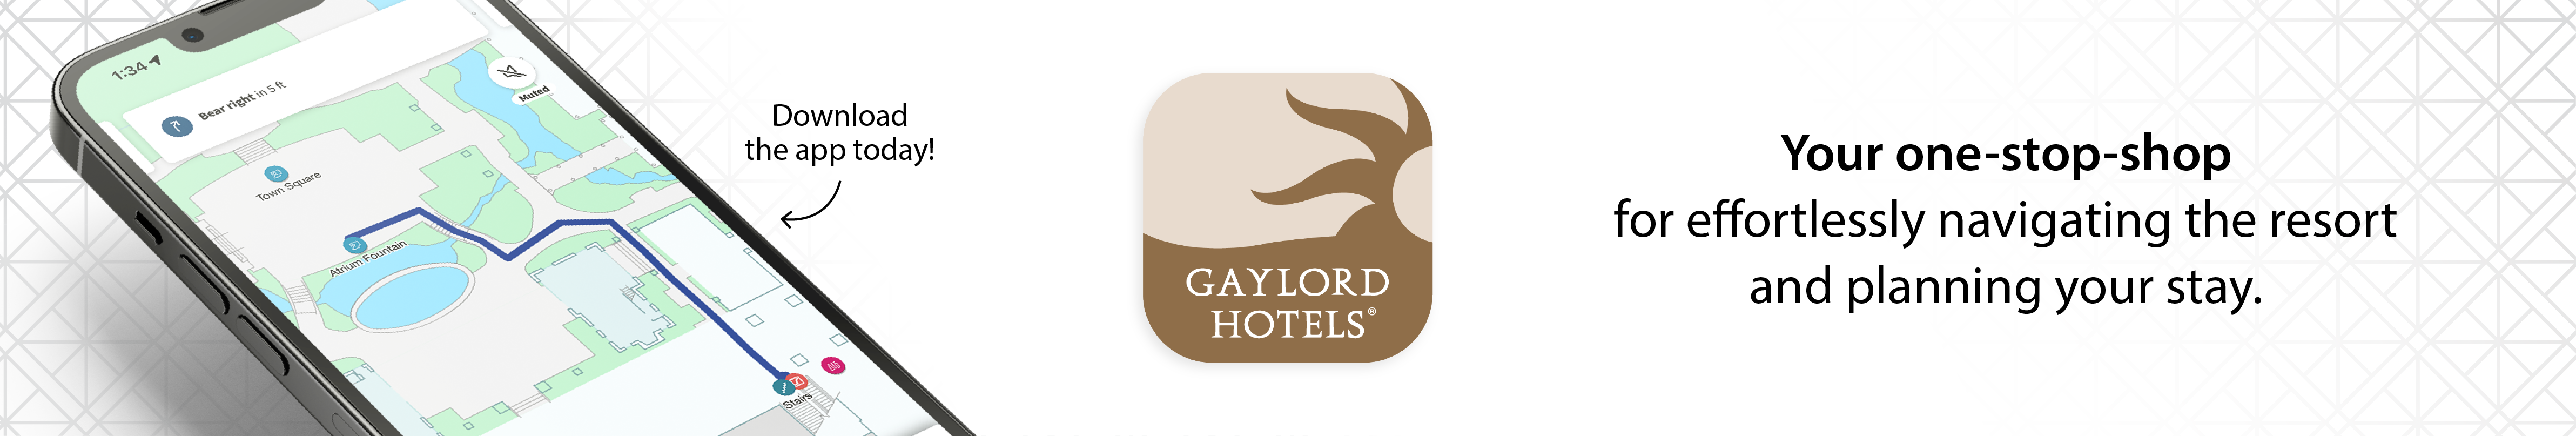 Gaylord Hotels App